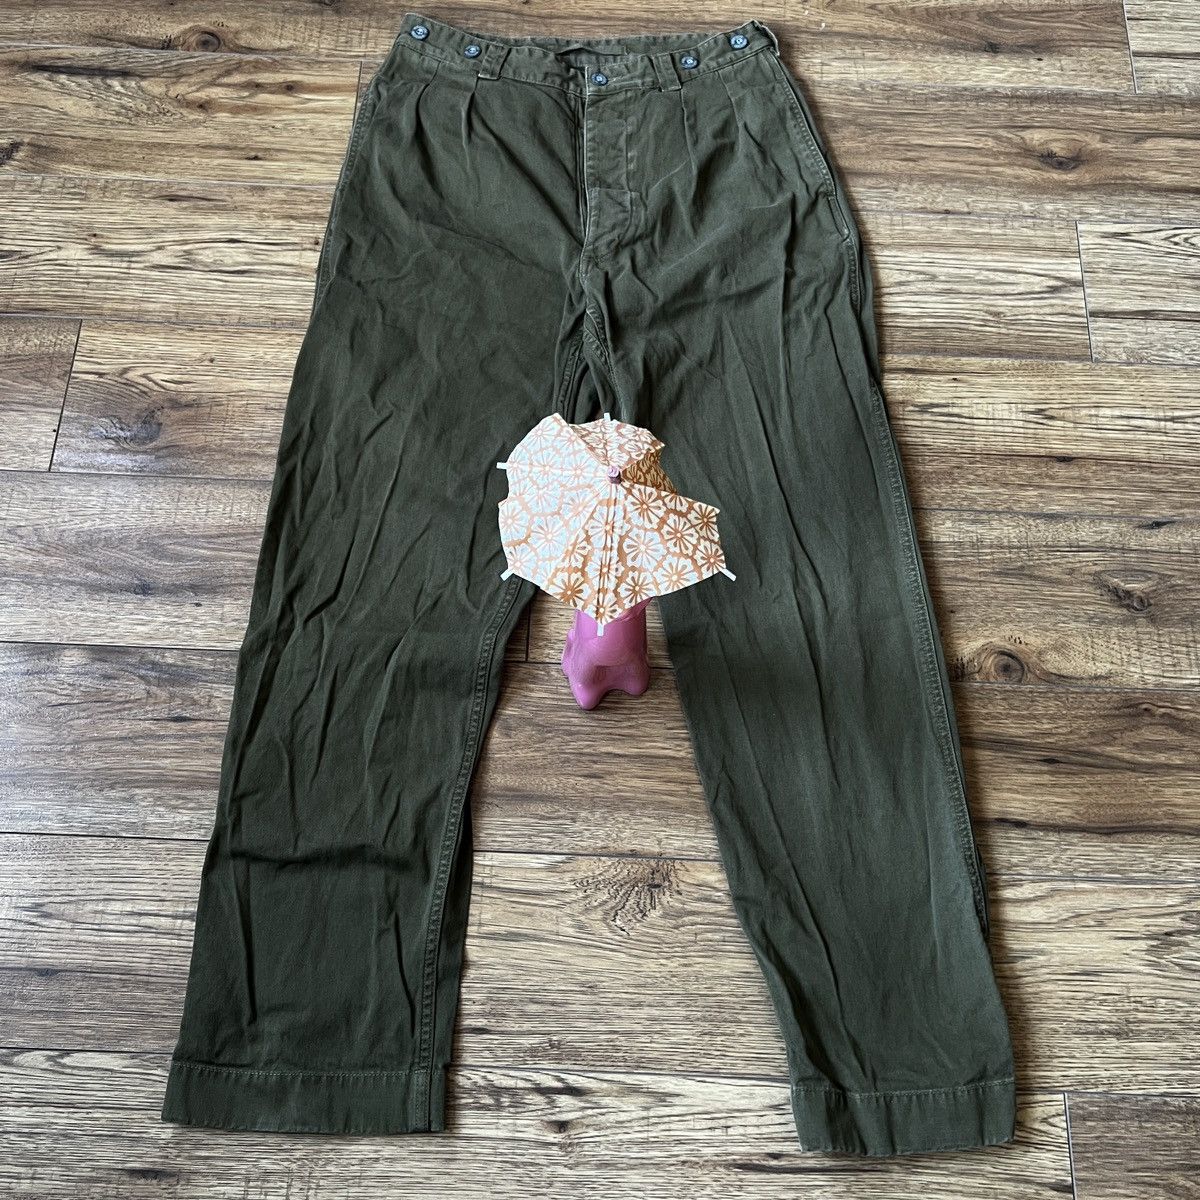 Nigel Cabourn Lybro by Nigel Cabourn military style pants | Grailed